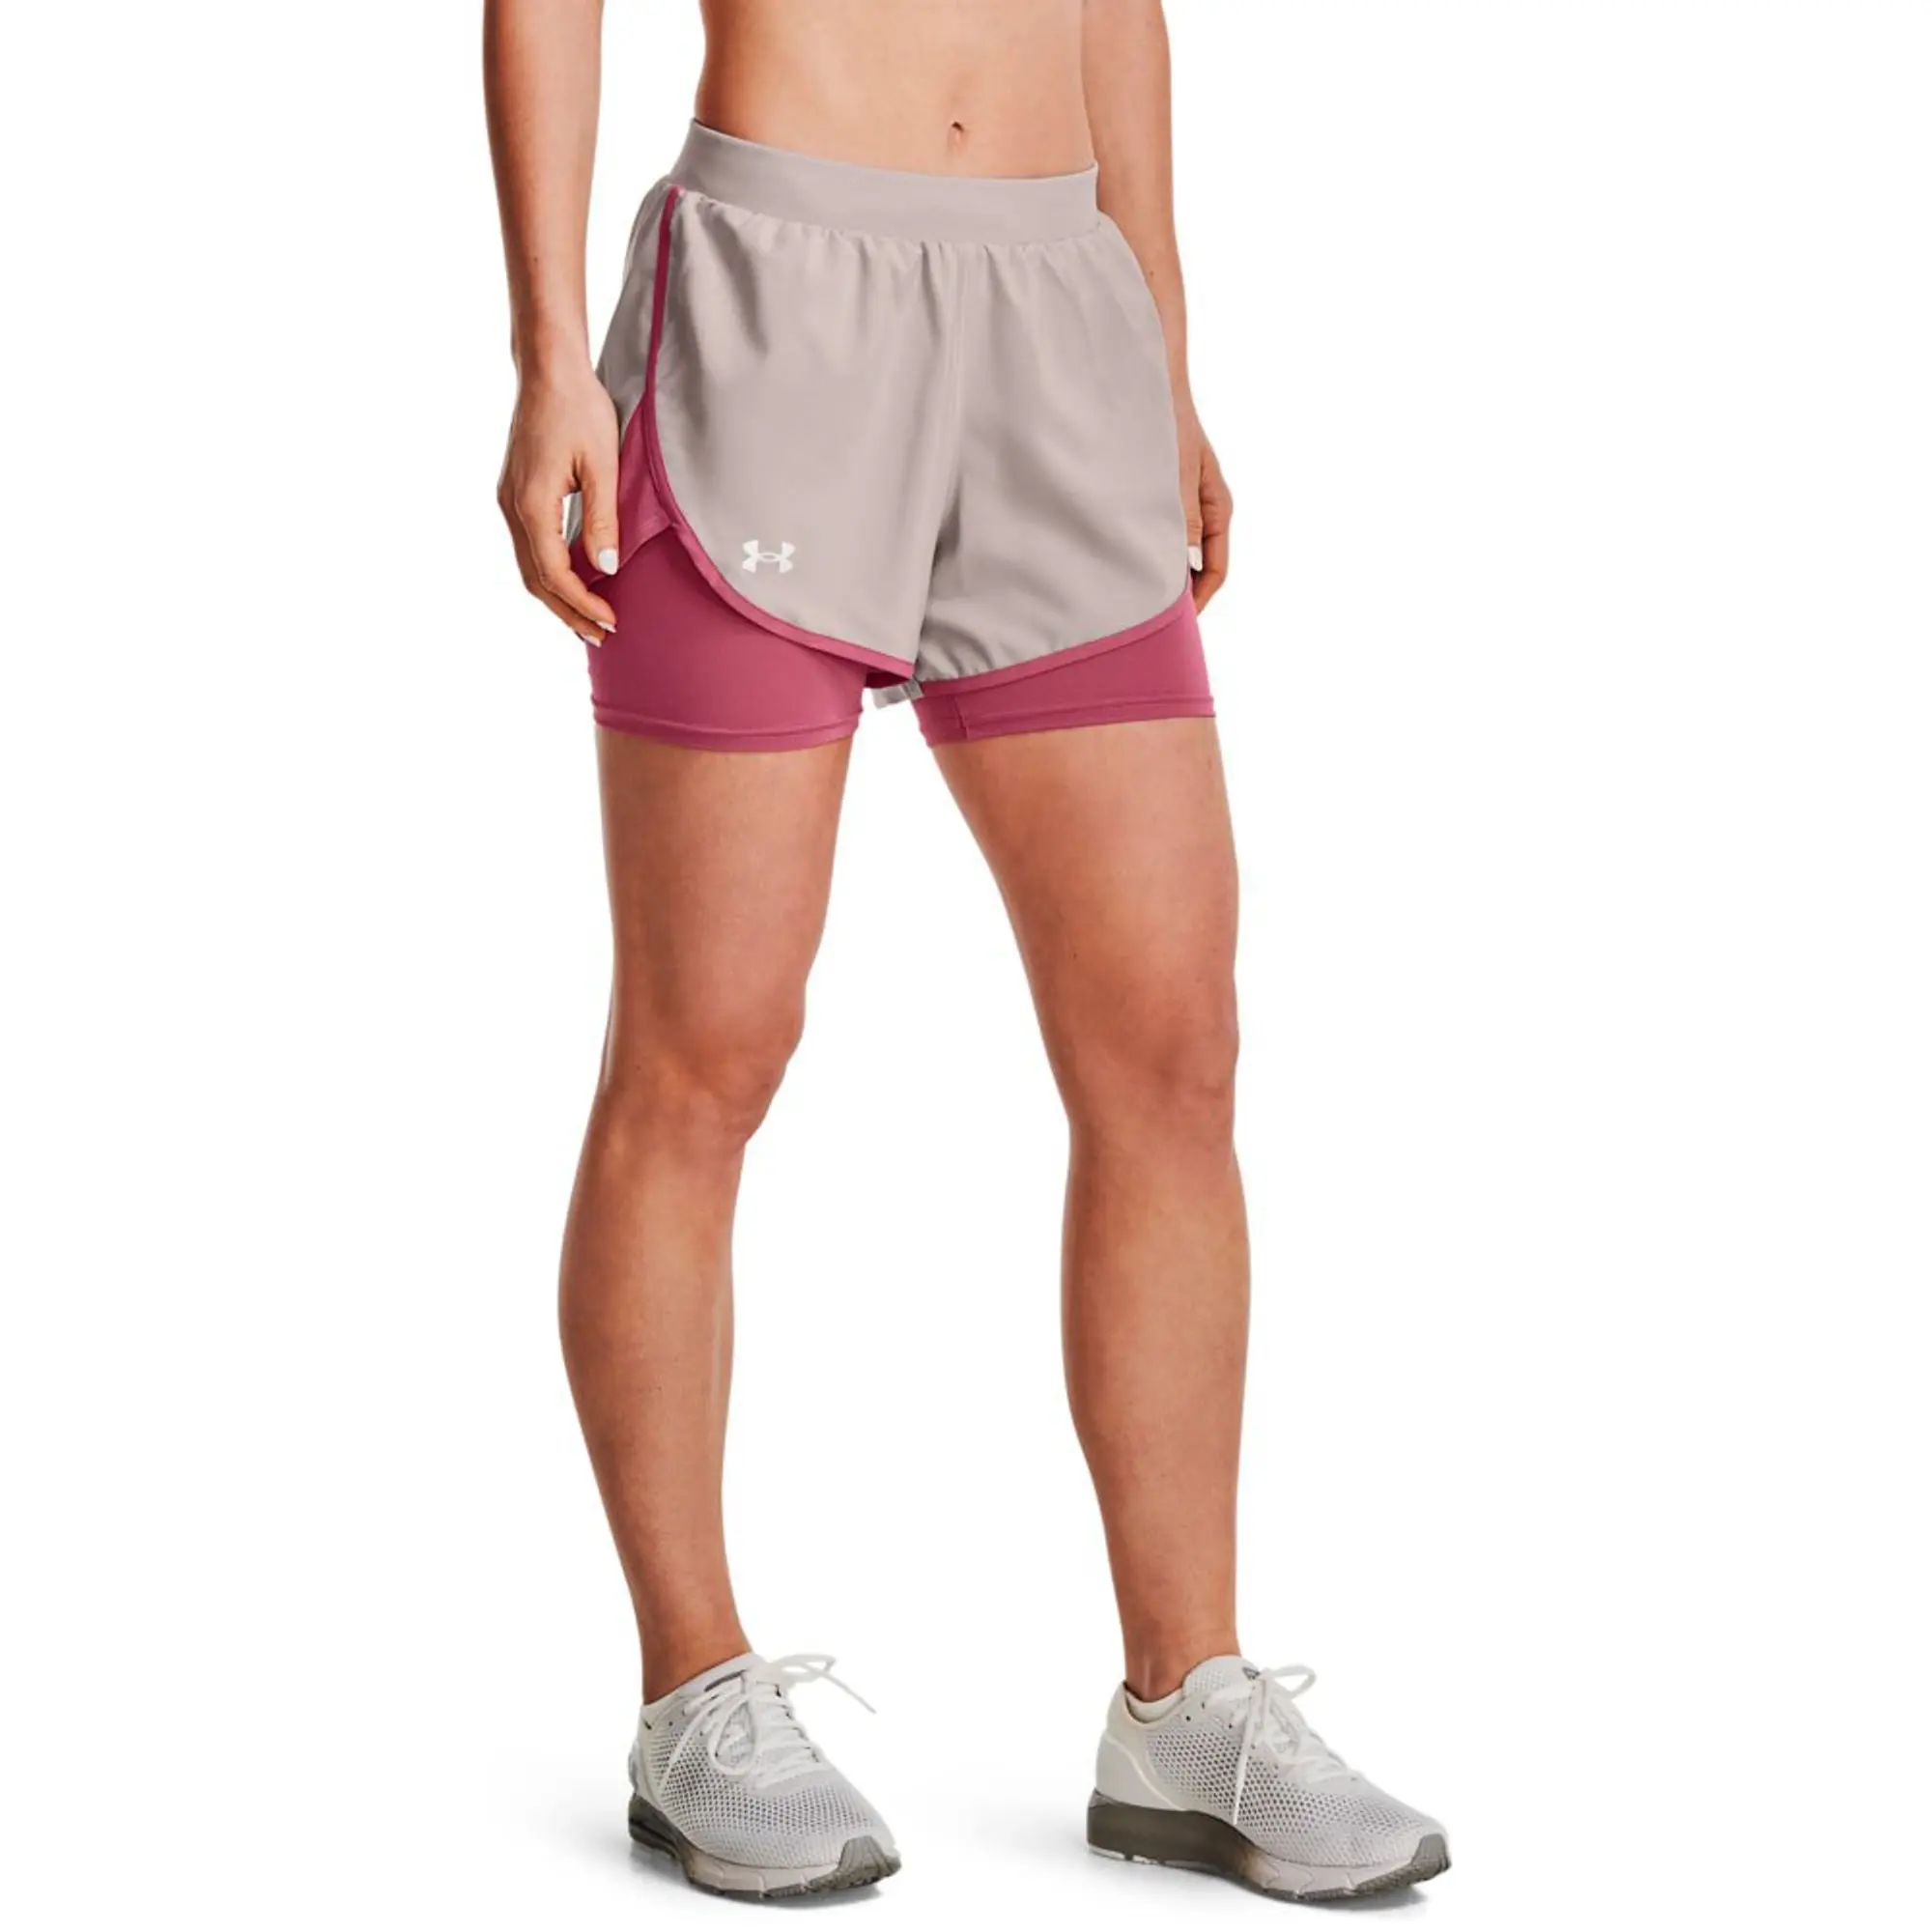 Under Armour Womens Fly By Elite 2 in 1 Shorts - Grey